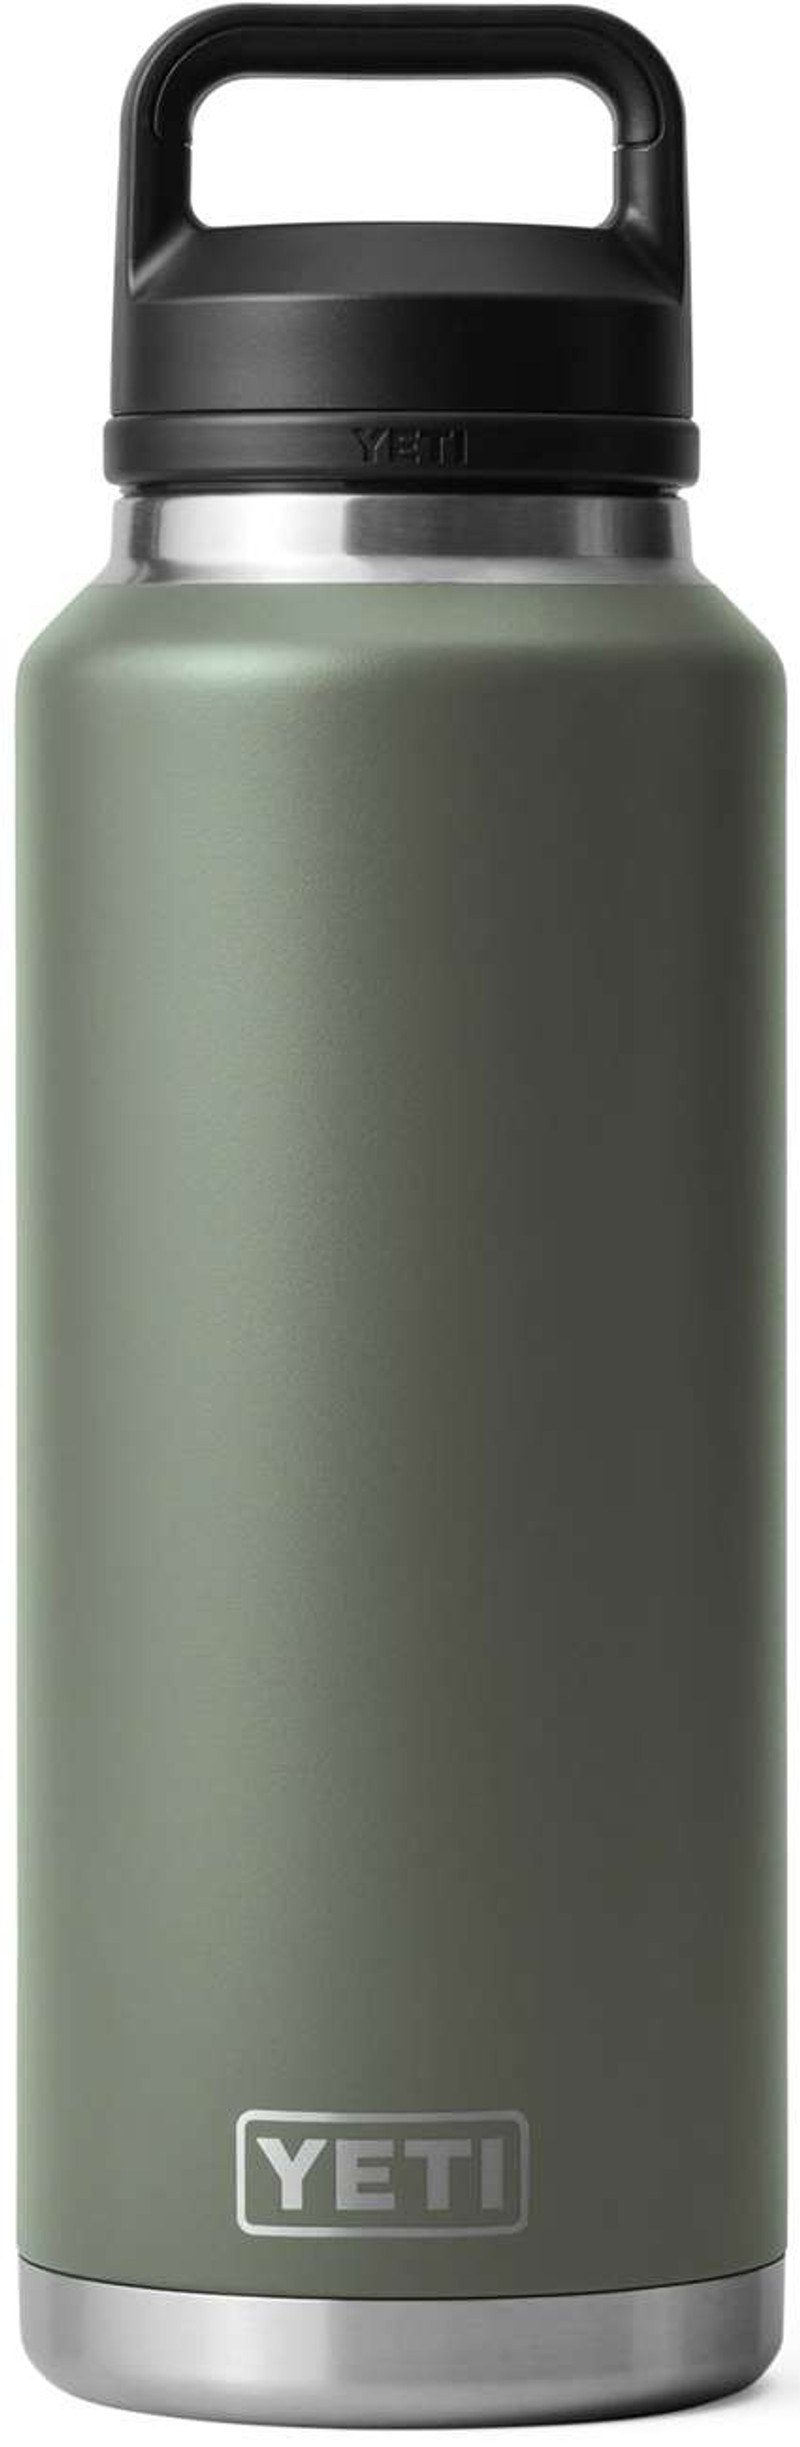 YETI Rambler 46 oz Bottle, Vacuum Insulated, Stainless Steel with Chug Cap,  Cosmic Lilac